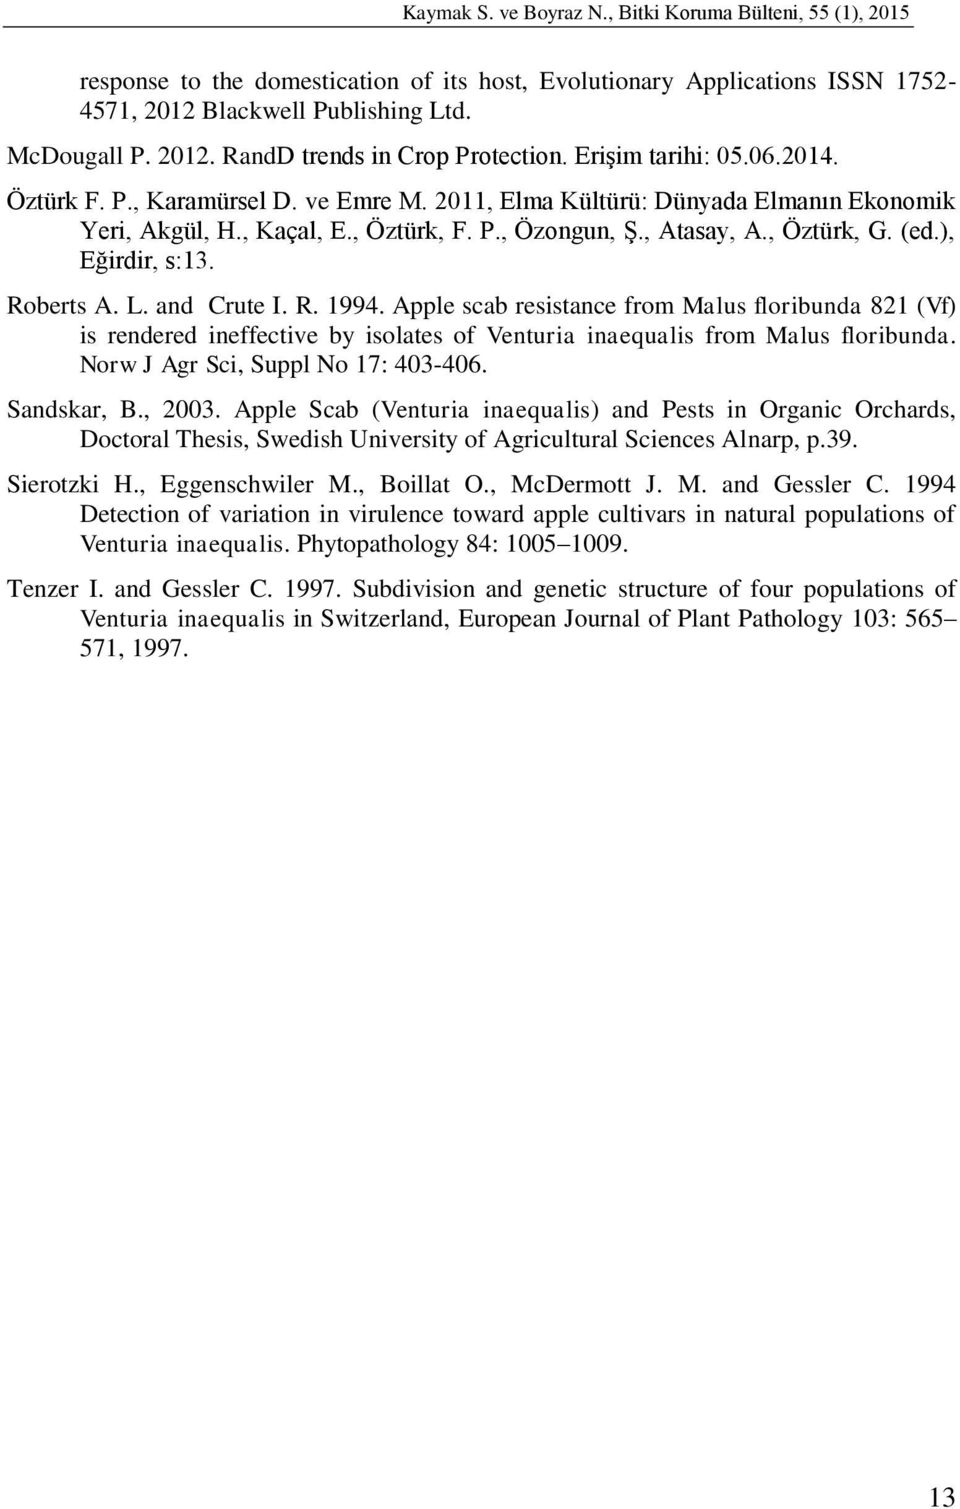 ), Eğirdir, s:13. Roberts A. L. and Crute I. R. 1994. Apple scab resistance from Malus floribunda 821 (Vf) is rendered ineffective by isolates of Venturia inaequalis from Malus floribunda.